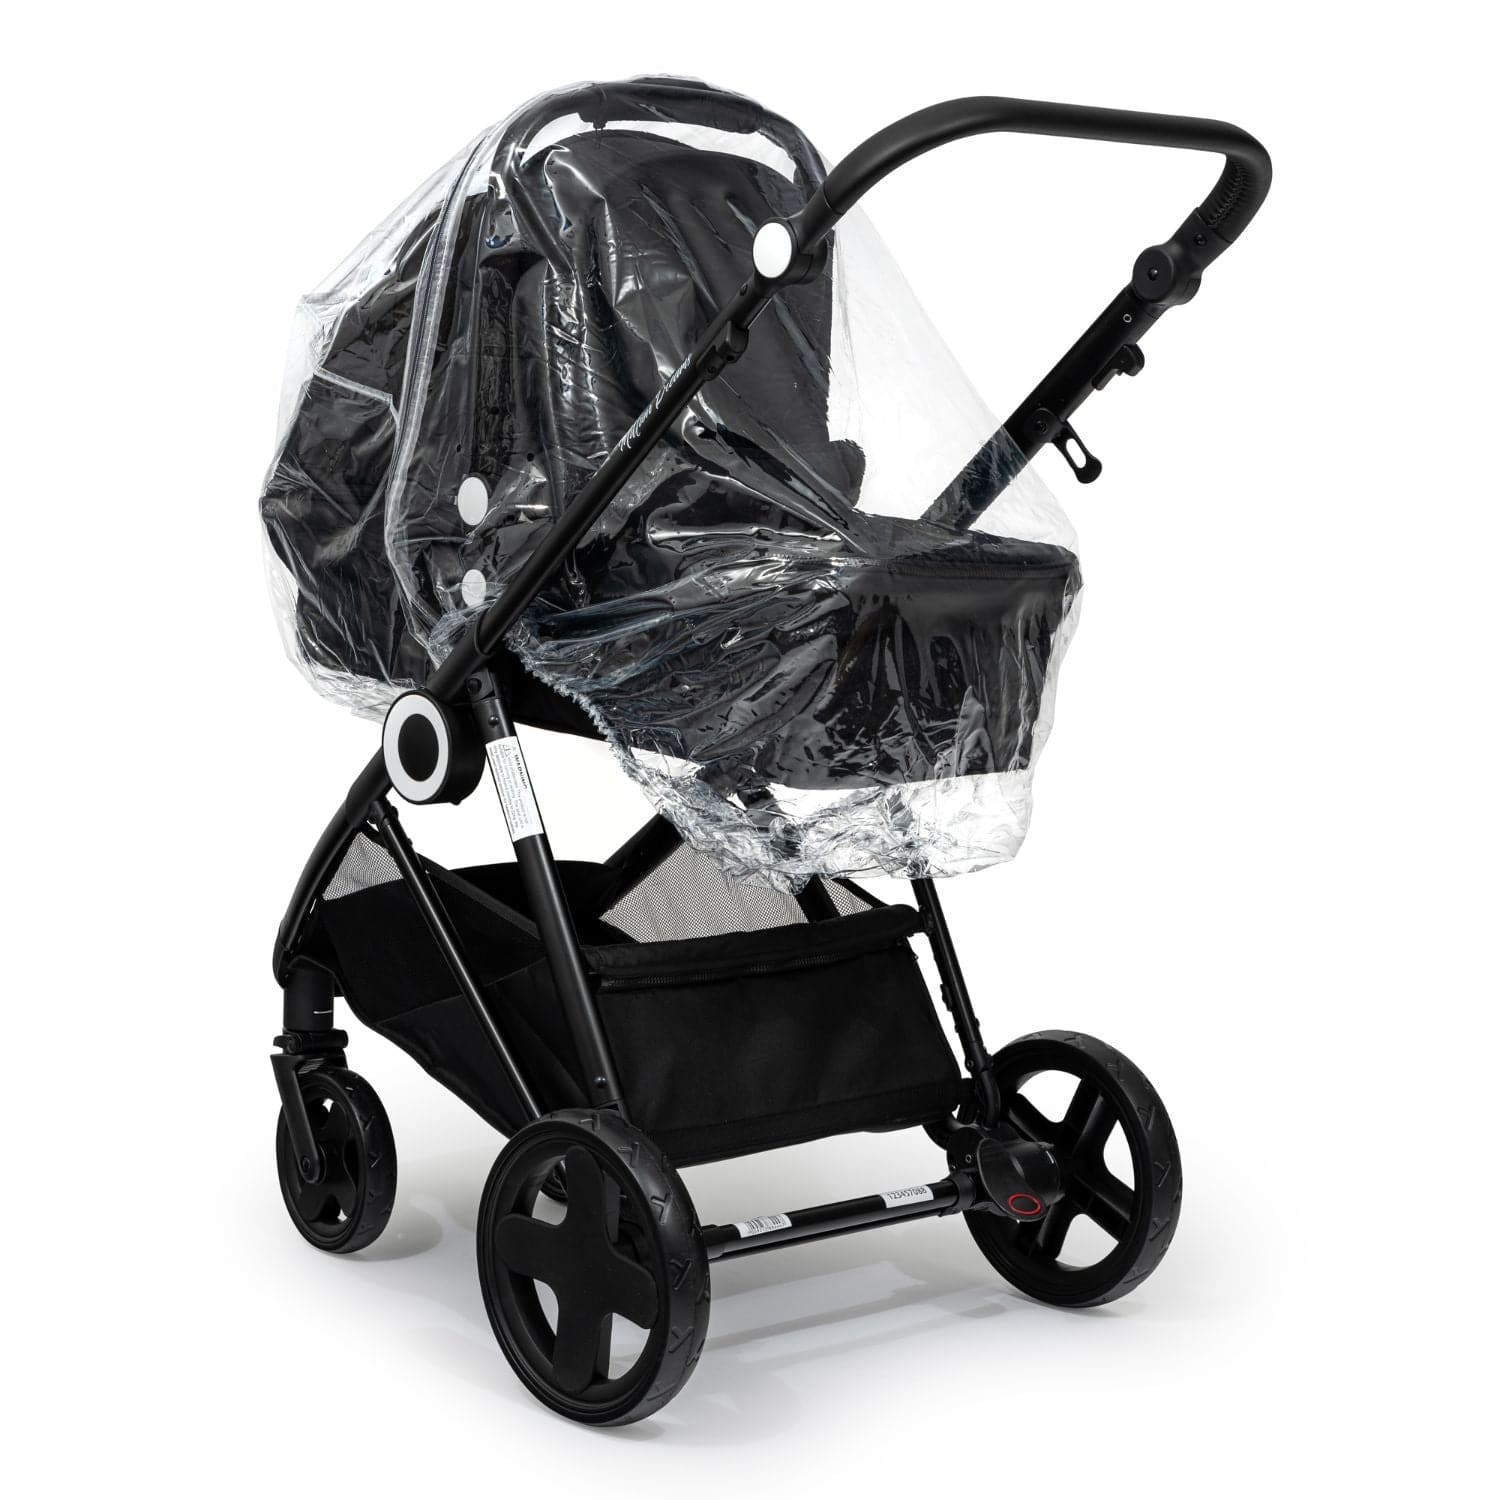 Carrycot Raincover Compatible With Bloom - Fits All Models - For Your Little One